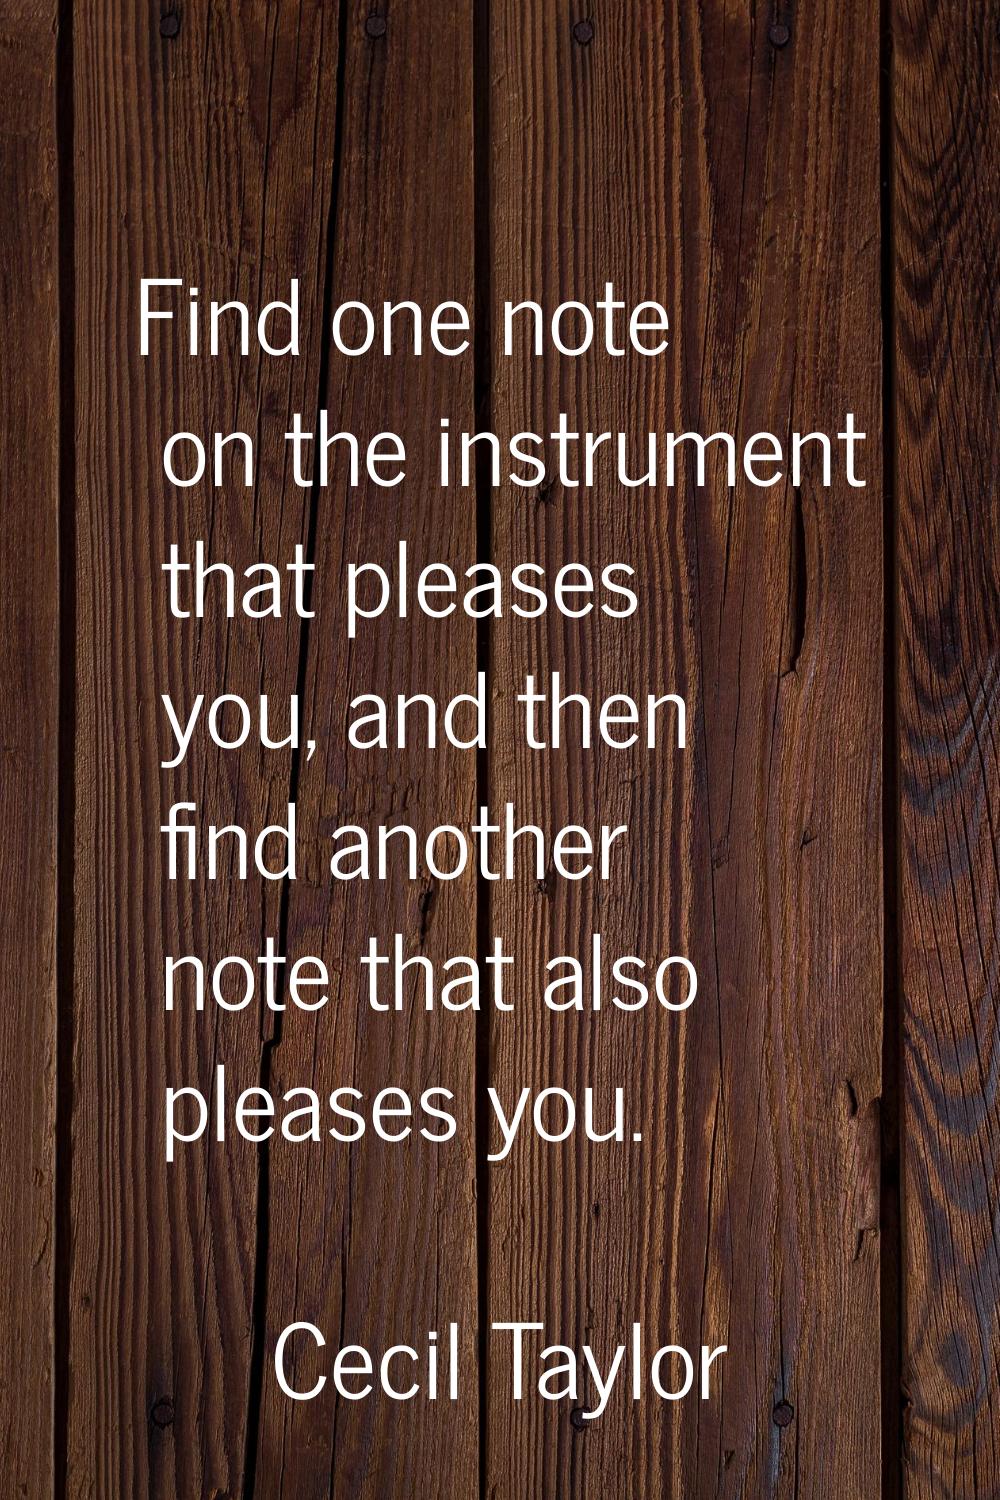 Find one note on the instrument that pleases you, and then find another note that also pleases you.